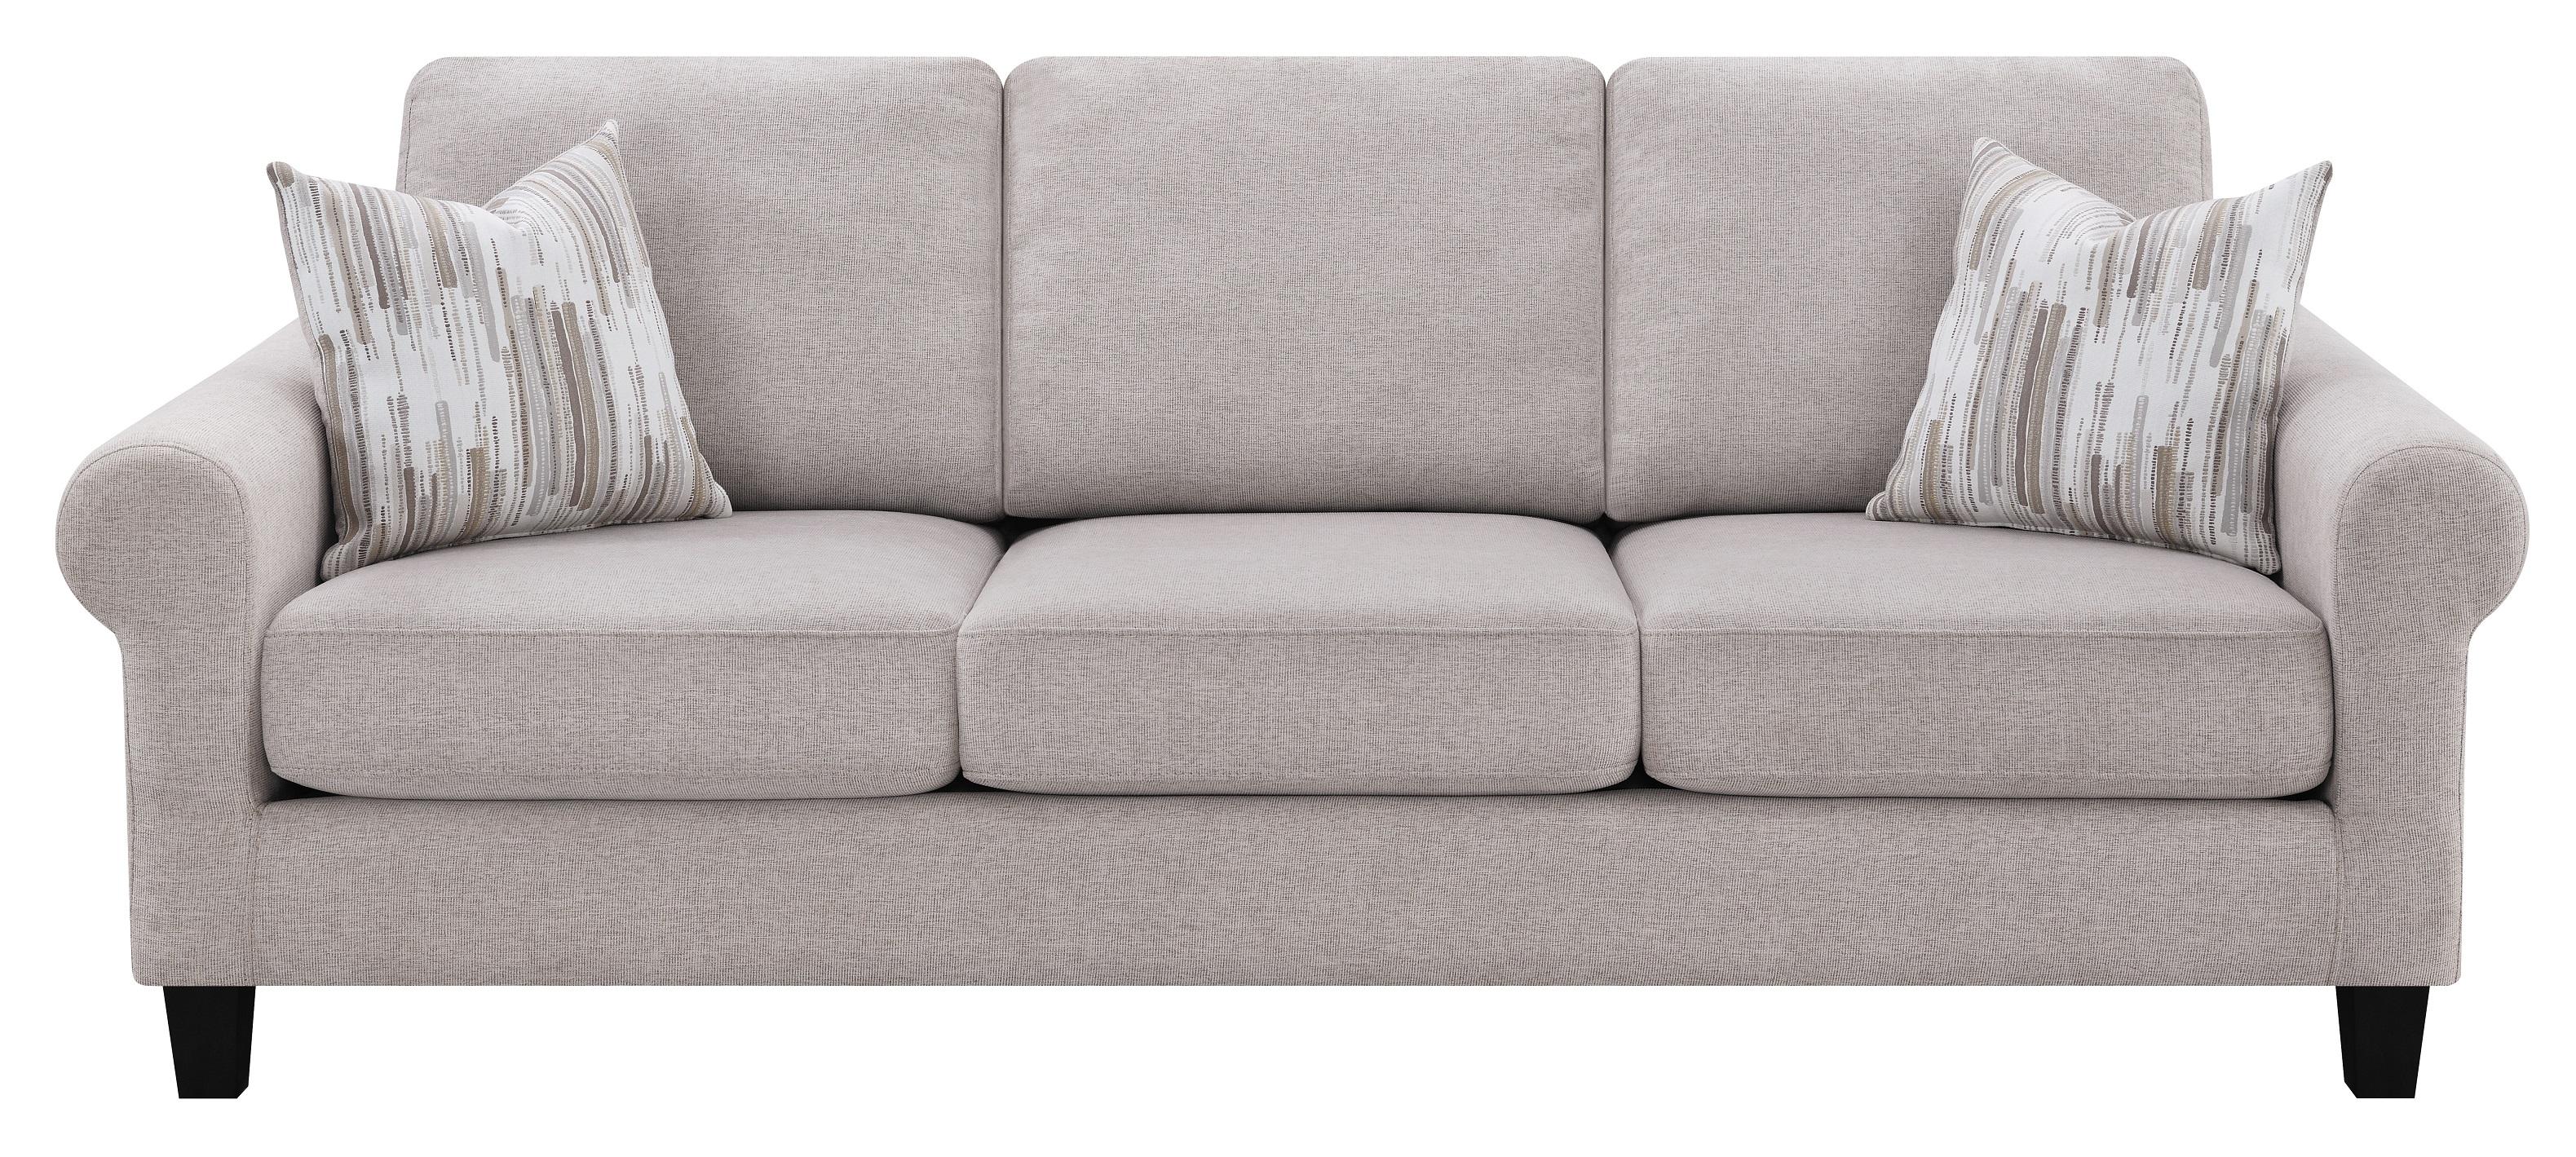 Transitional Sofa 509781 Nadine 509781 in Oatmeal Chenille